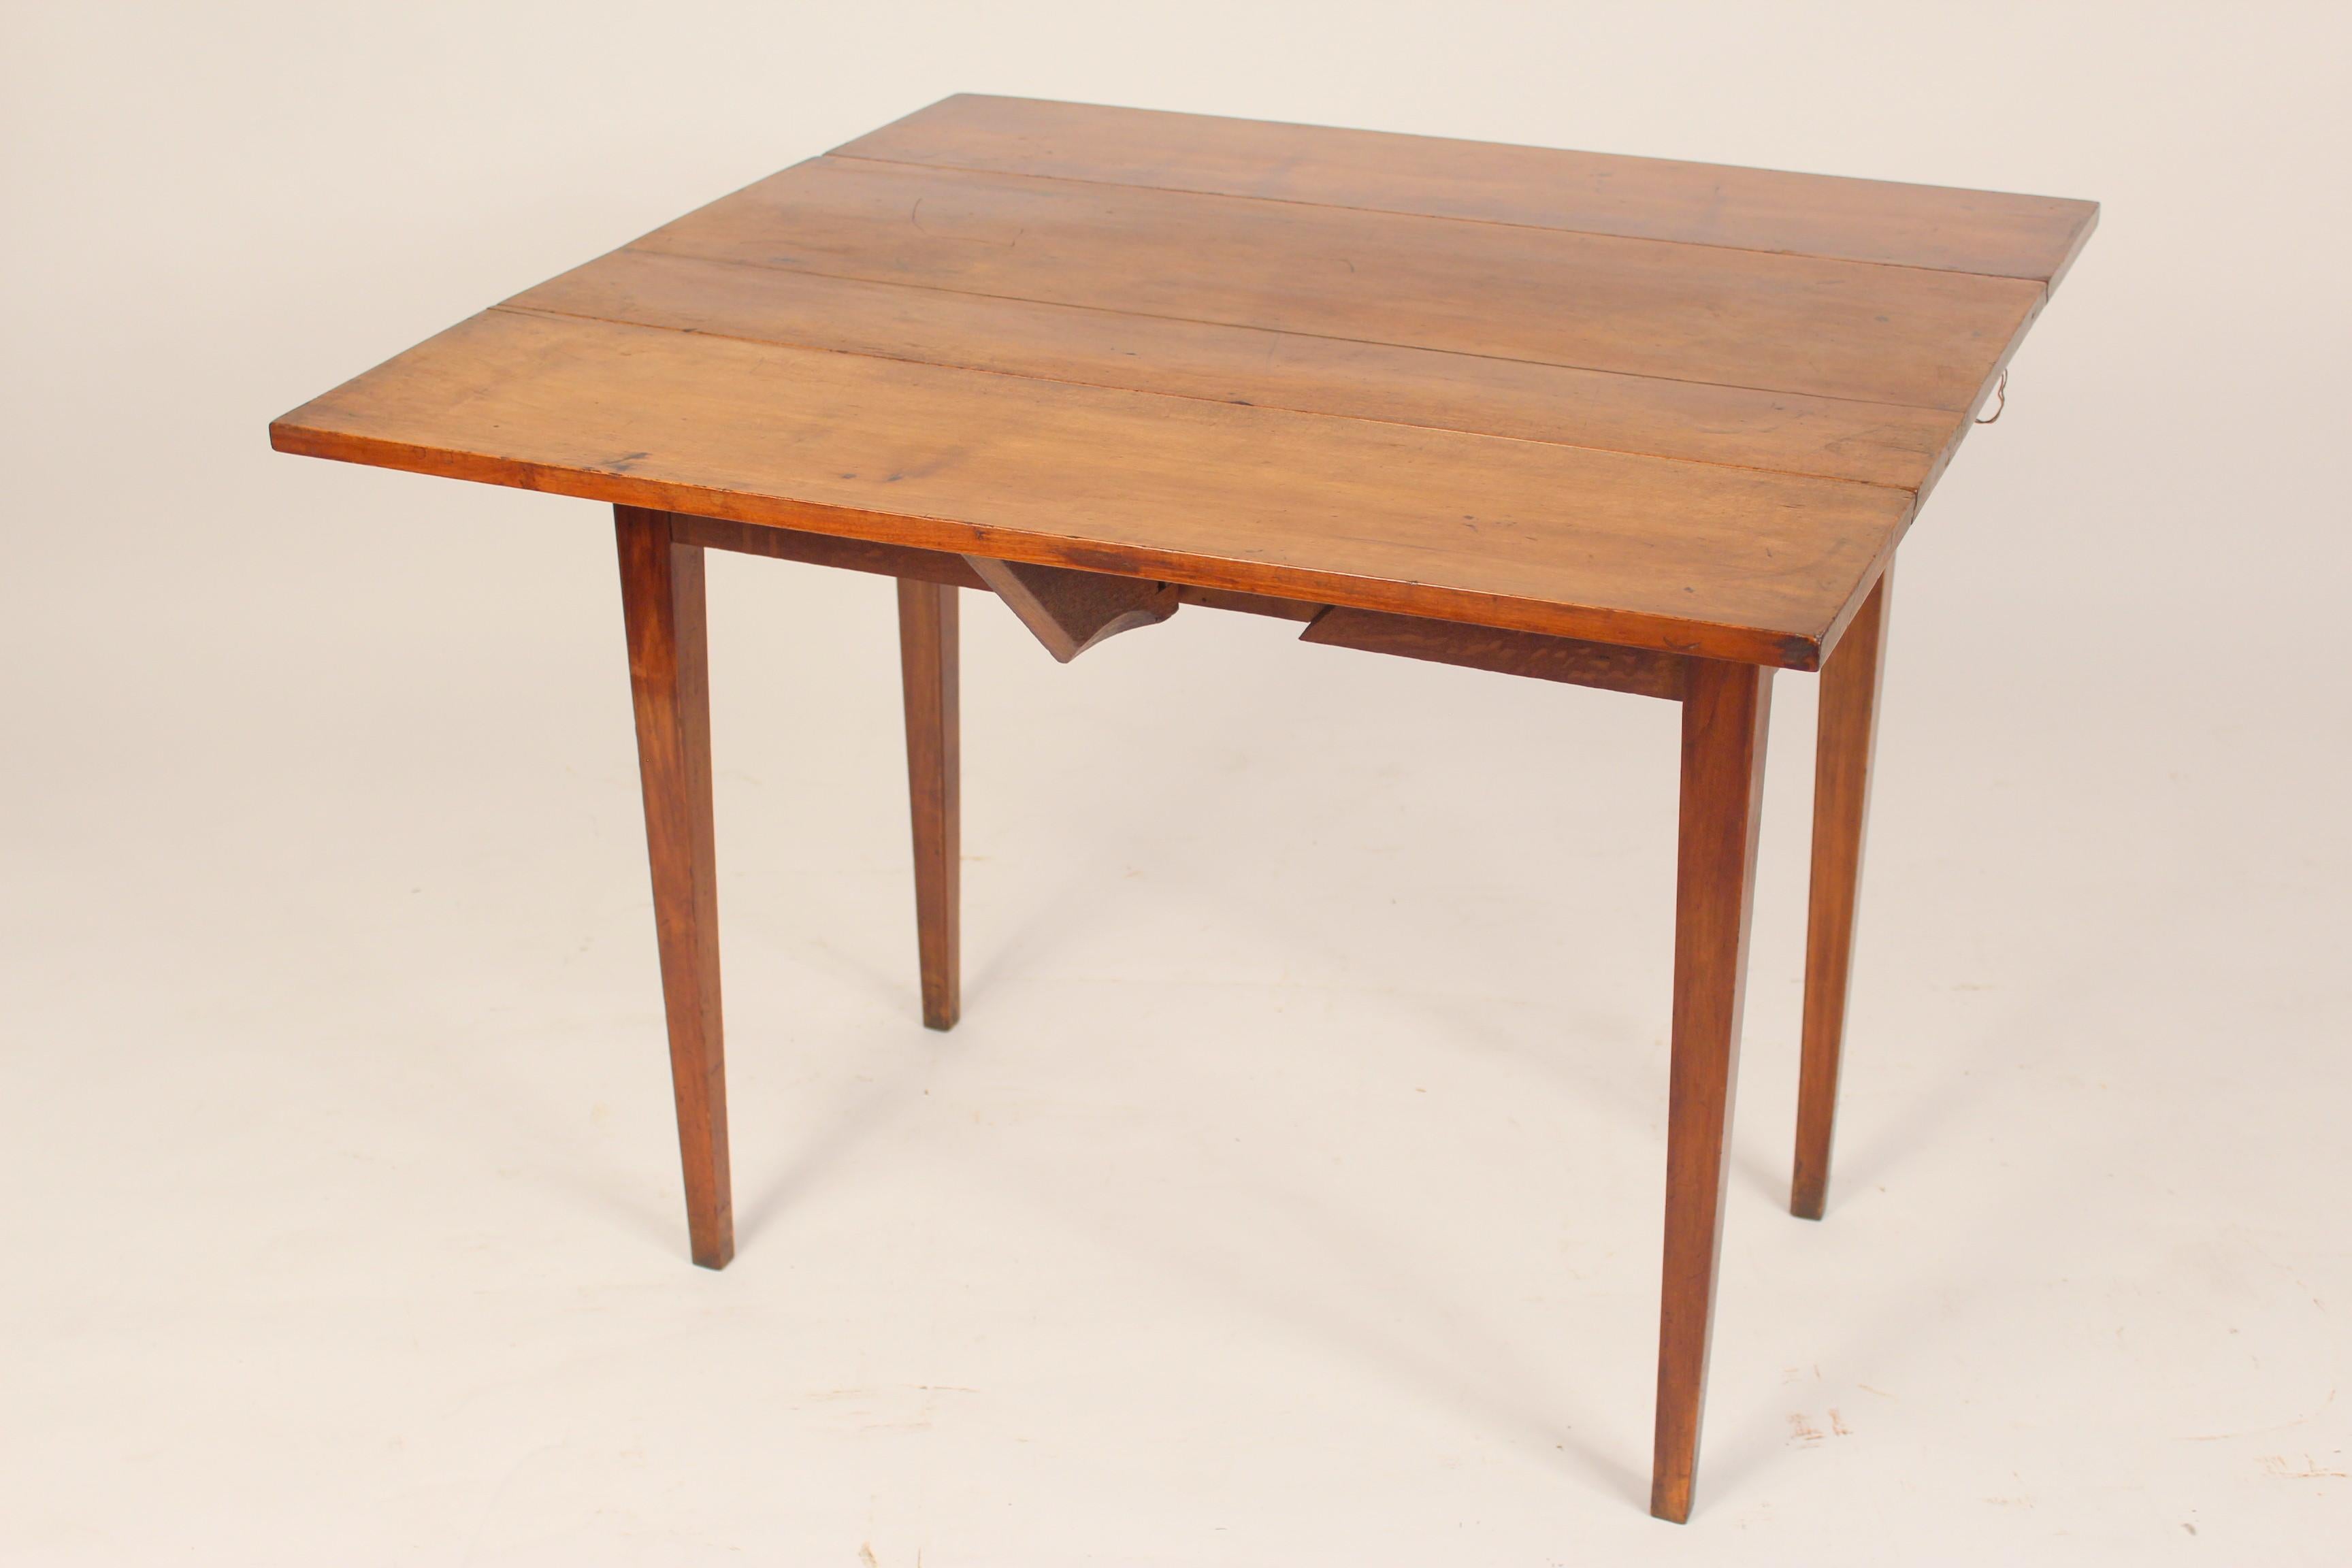 North American Neo Classical Fruit Wood Drop Leaf Table